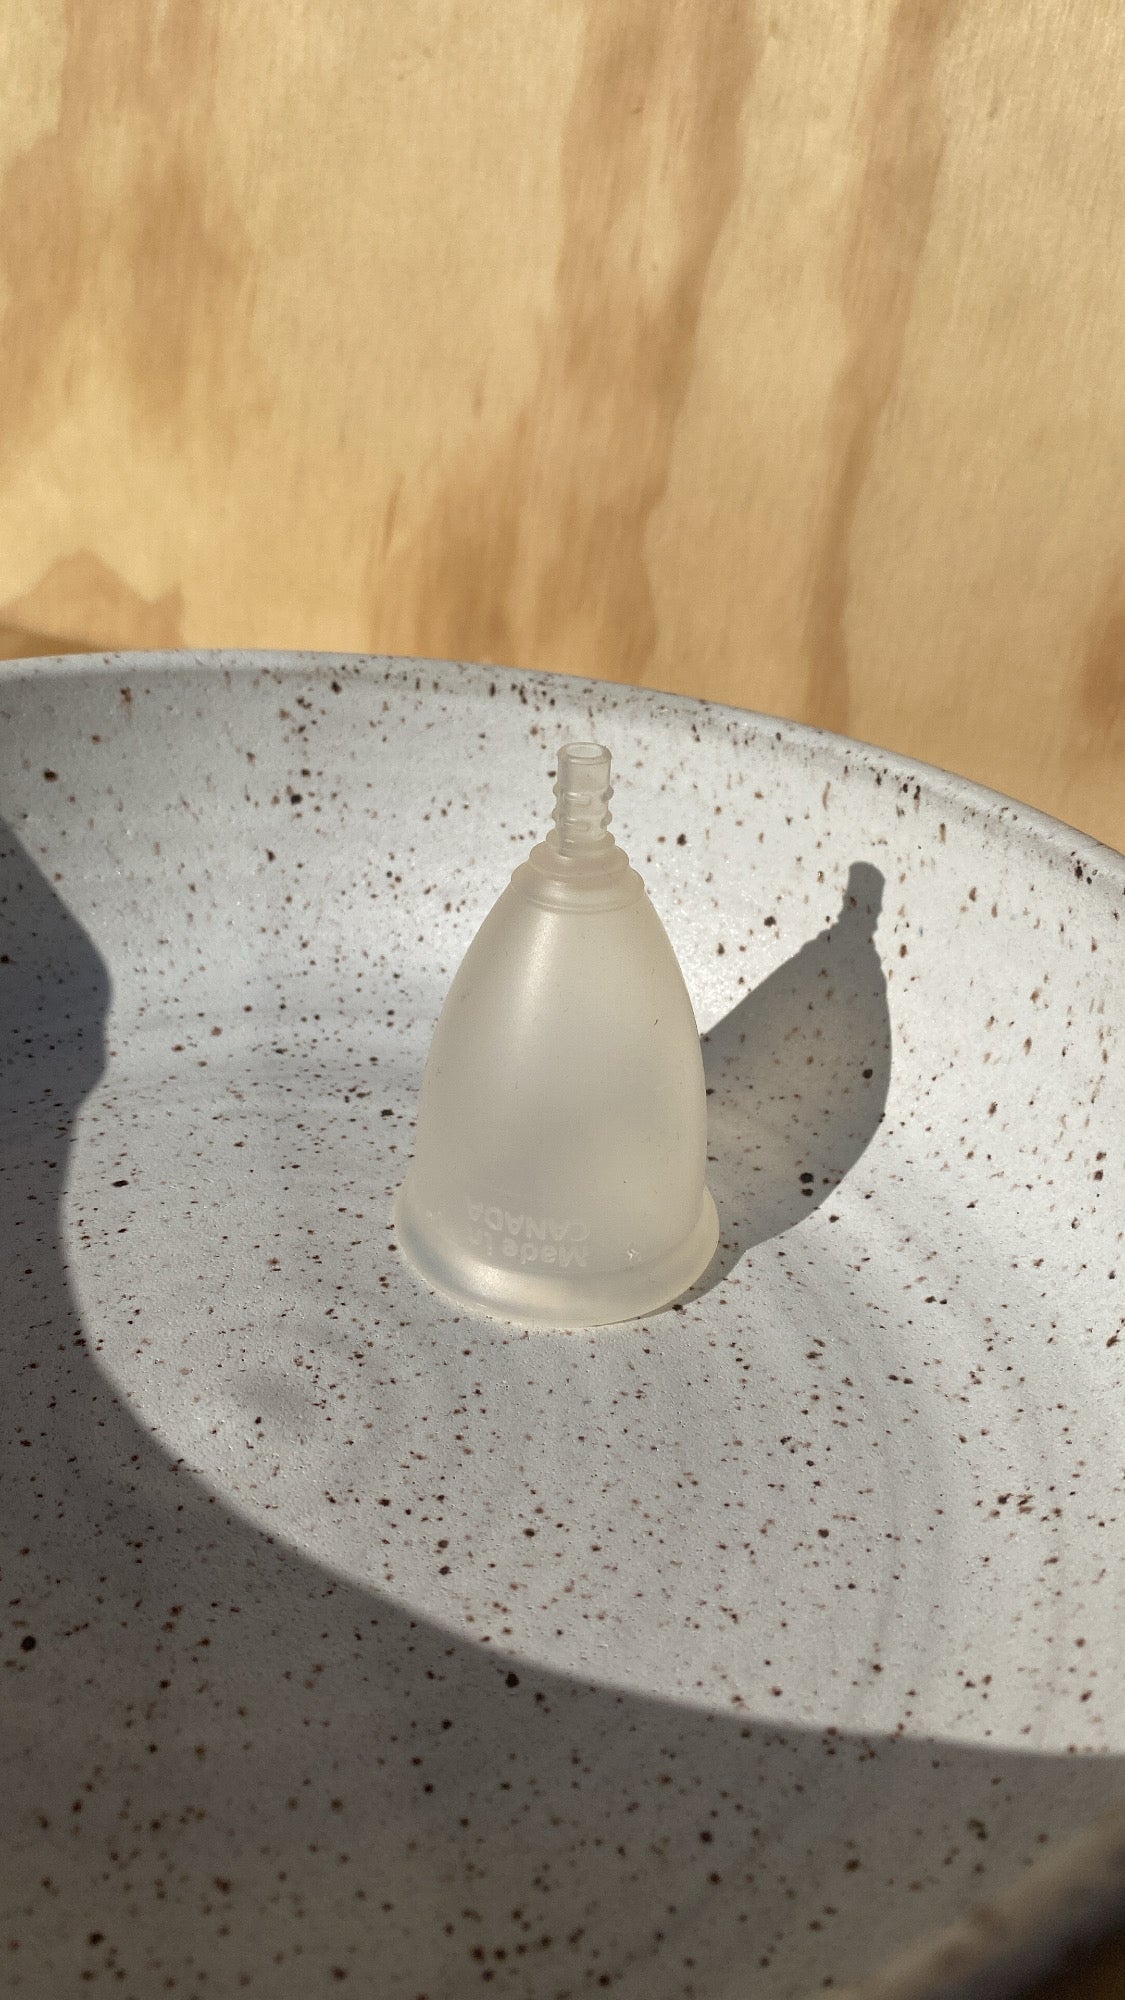 Aisle - Menstrual Cup Size B  Canadian Made Zero Waste Feminine Products –  All Things Being Eco